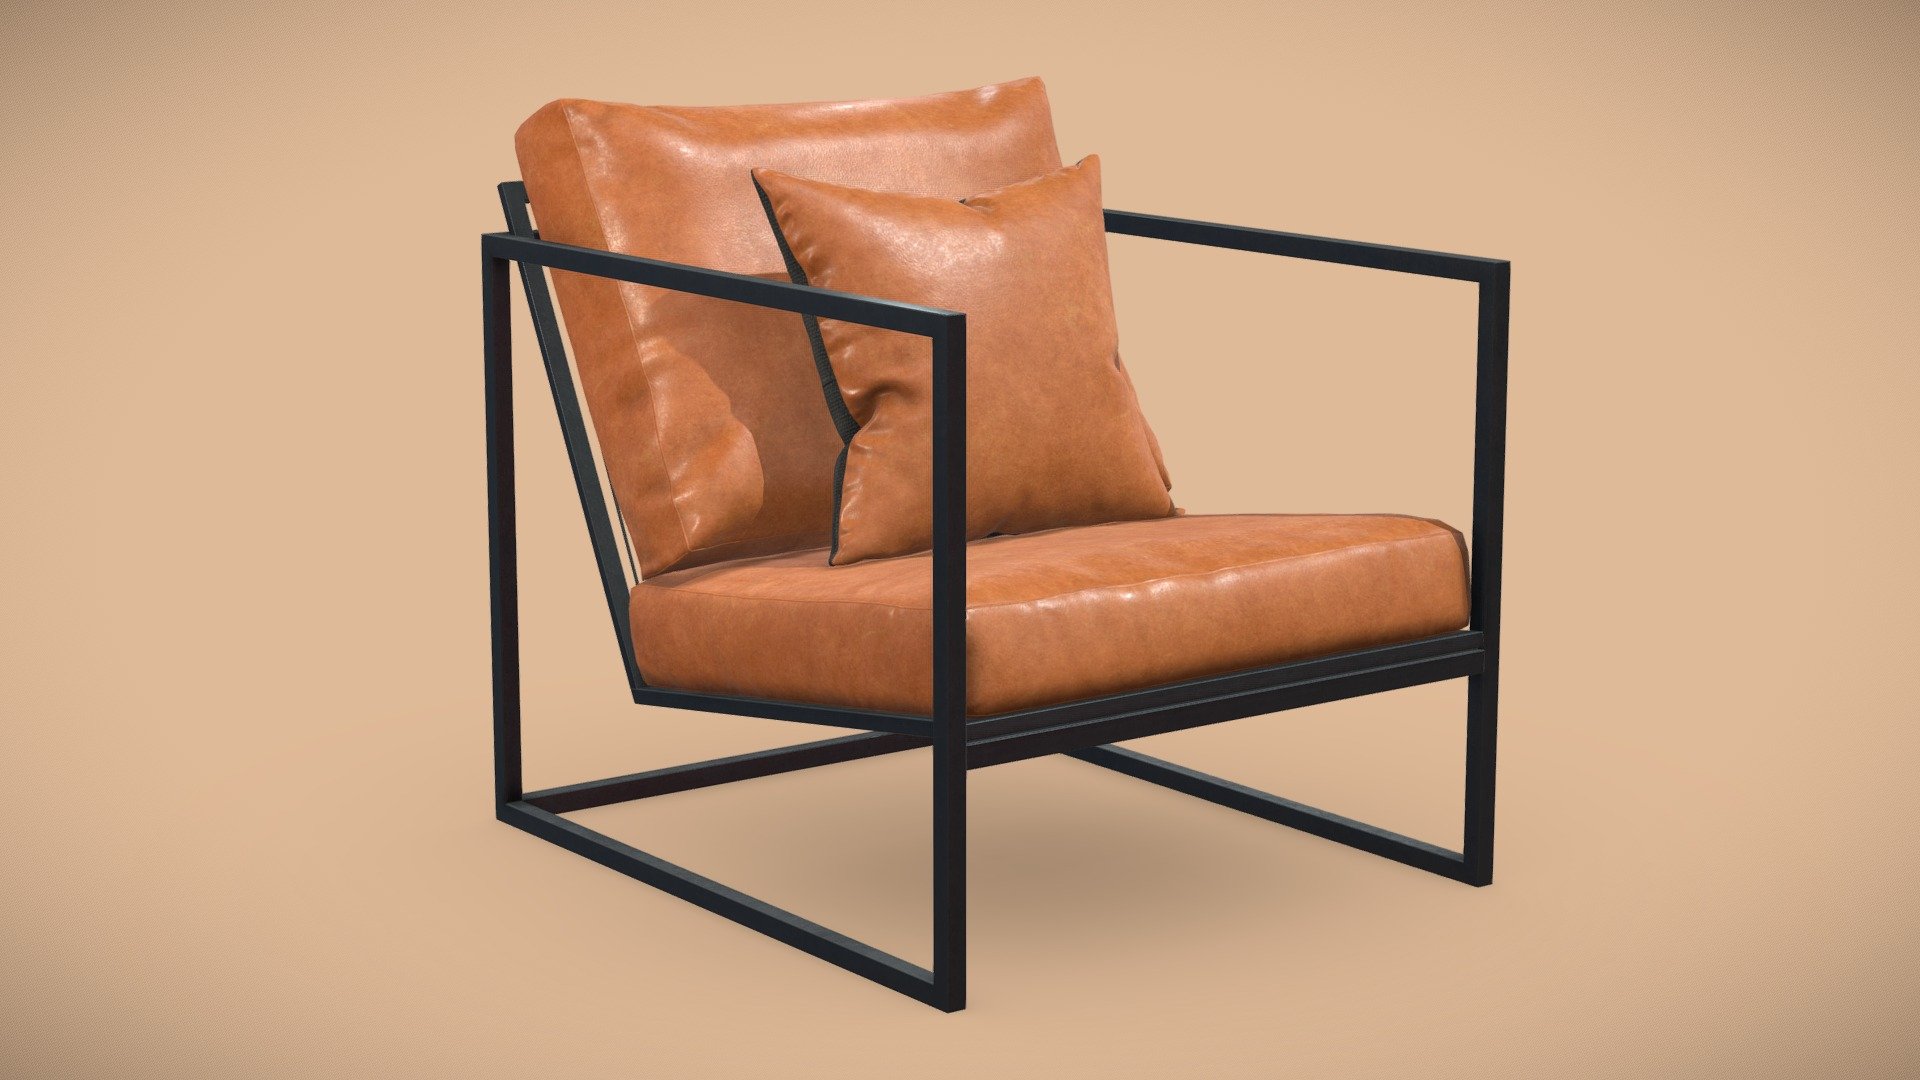 Stanley Armchair

Brown tan leather supported by a dark metal frame

4K textures - Stanley Armchair - Buy Royalty Free 3D model by AllQuad 3d model